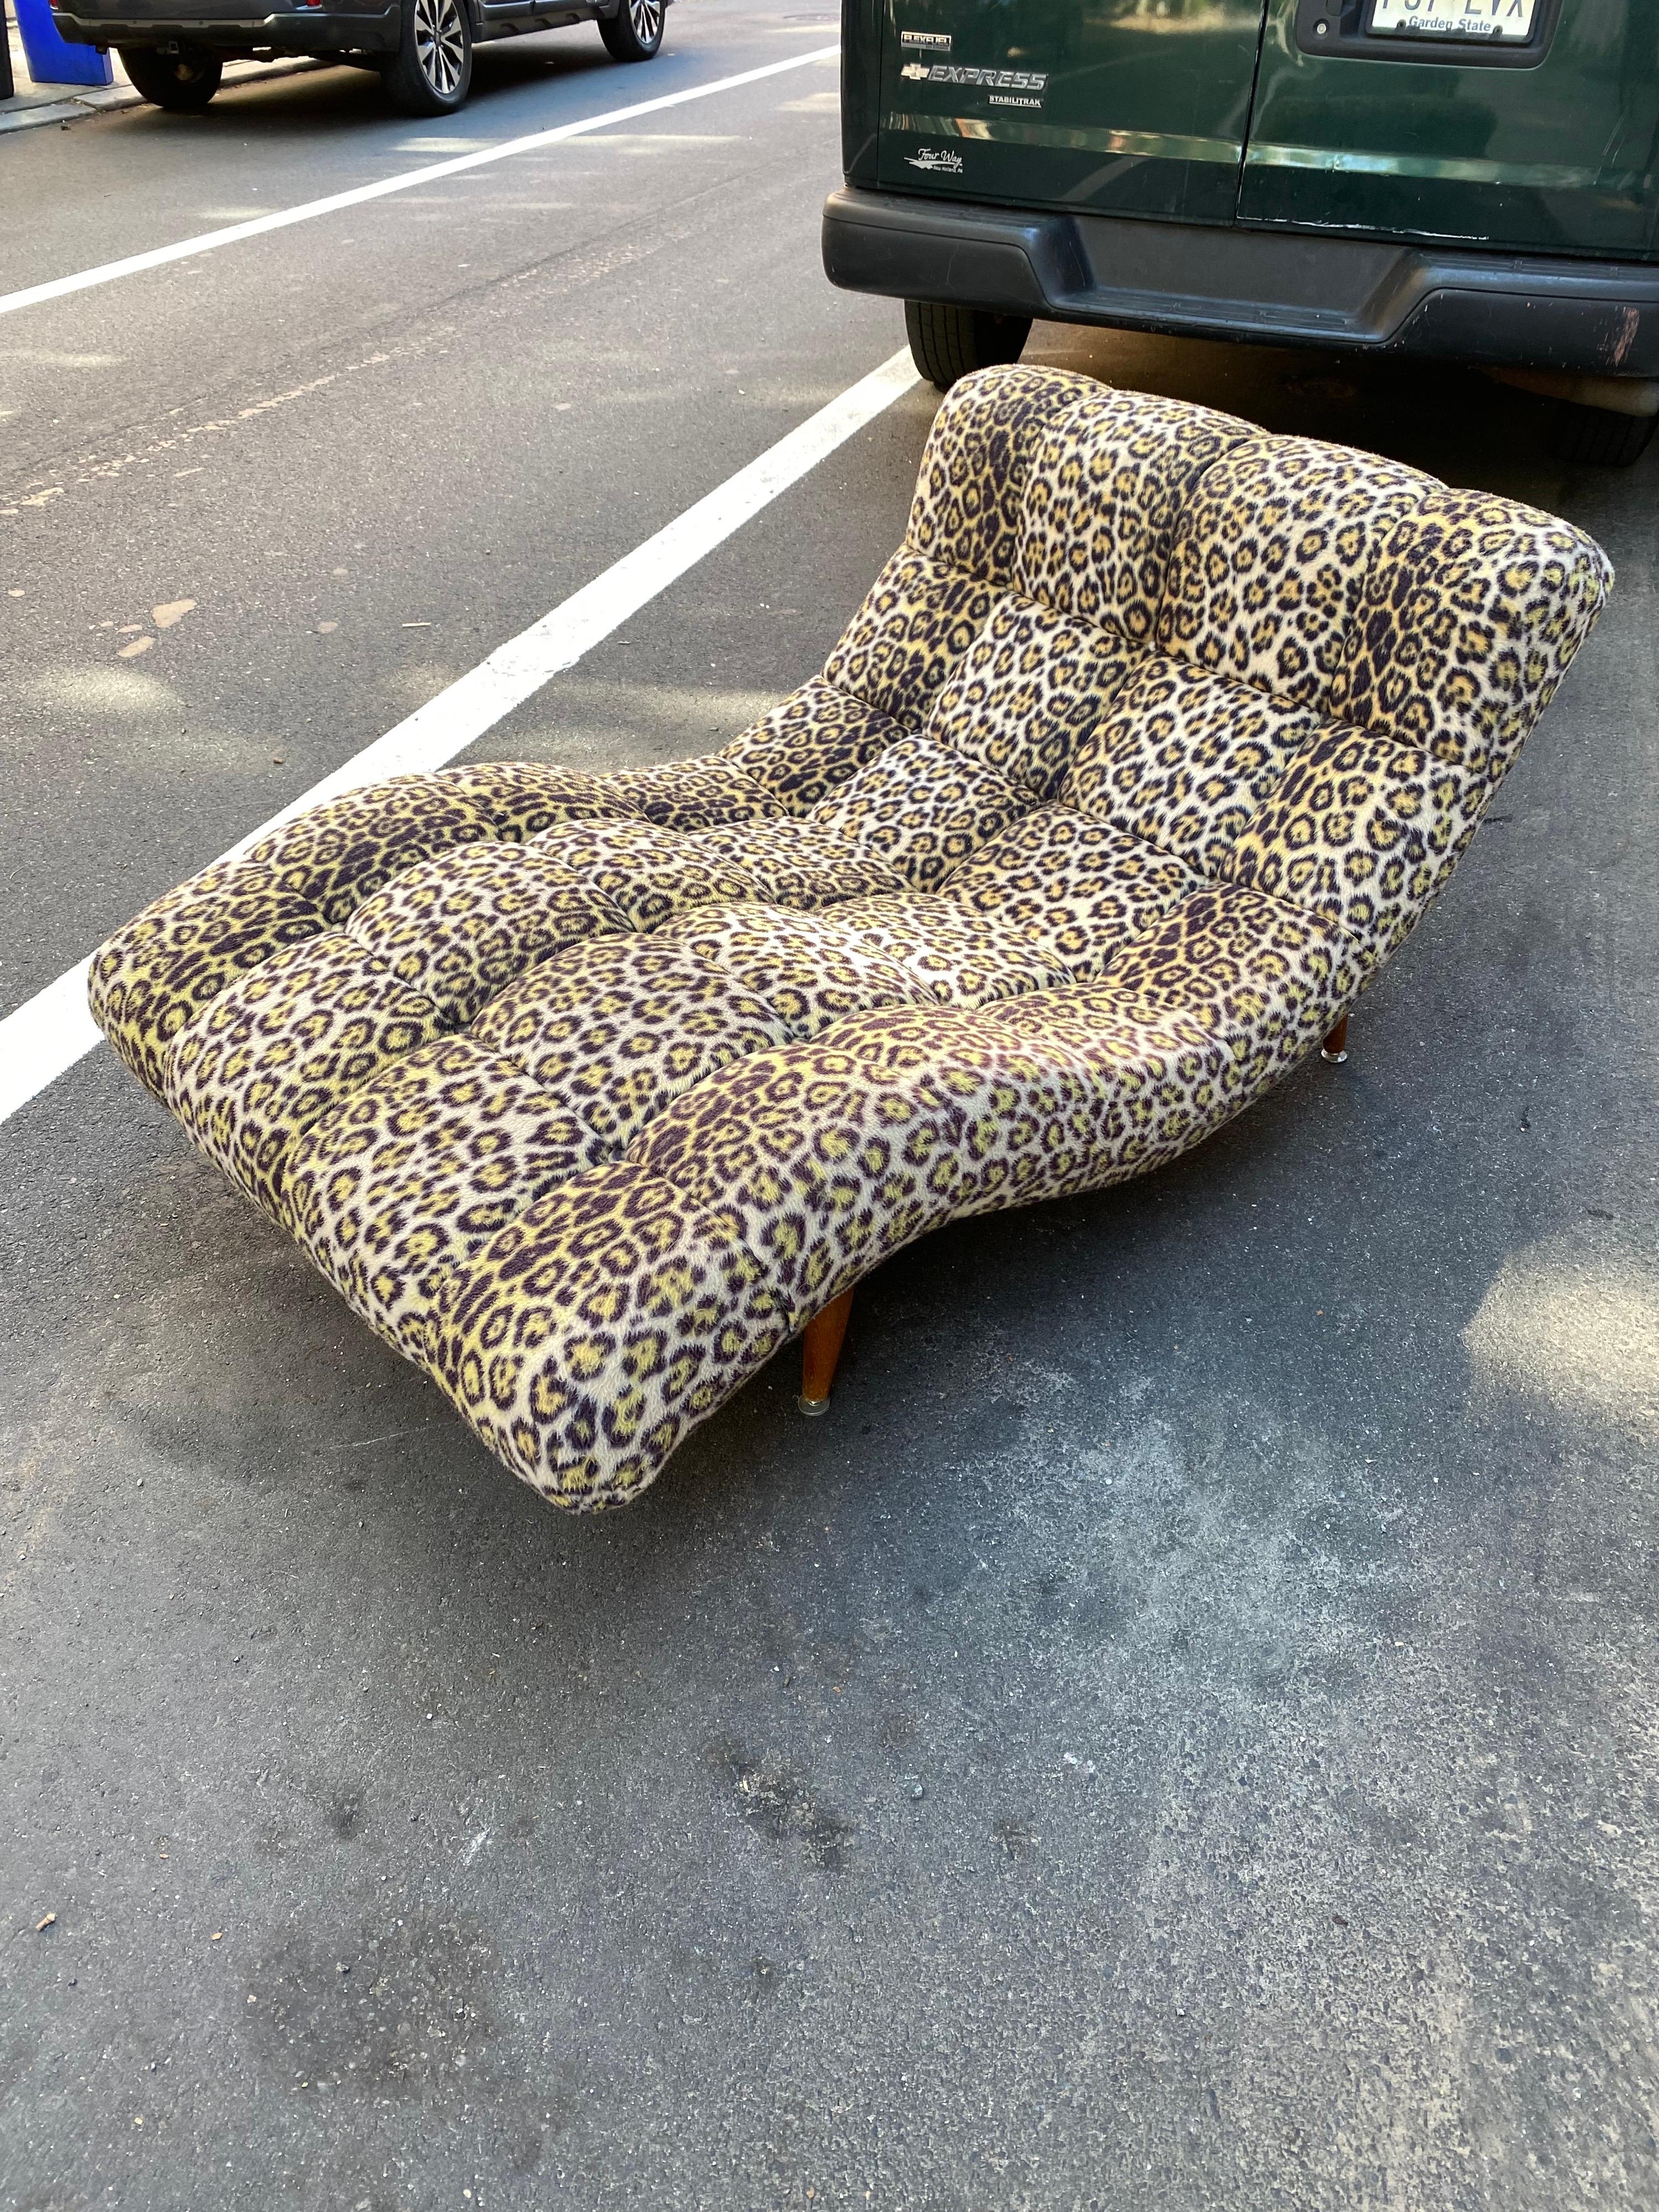 Adrian Pearsall Wave chaise lounge in it's original leopard print Fabric! Quite the statement with this one! Sits very well and solid as a rock!